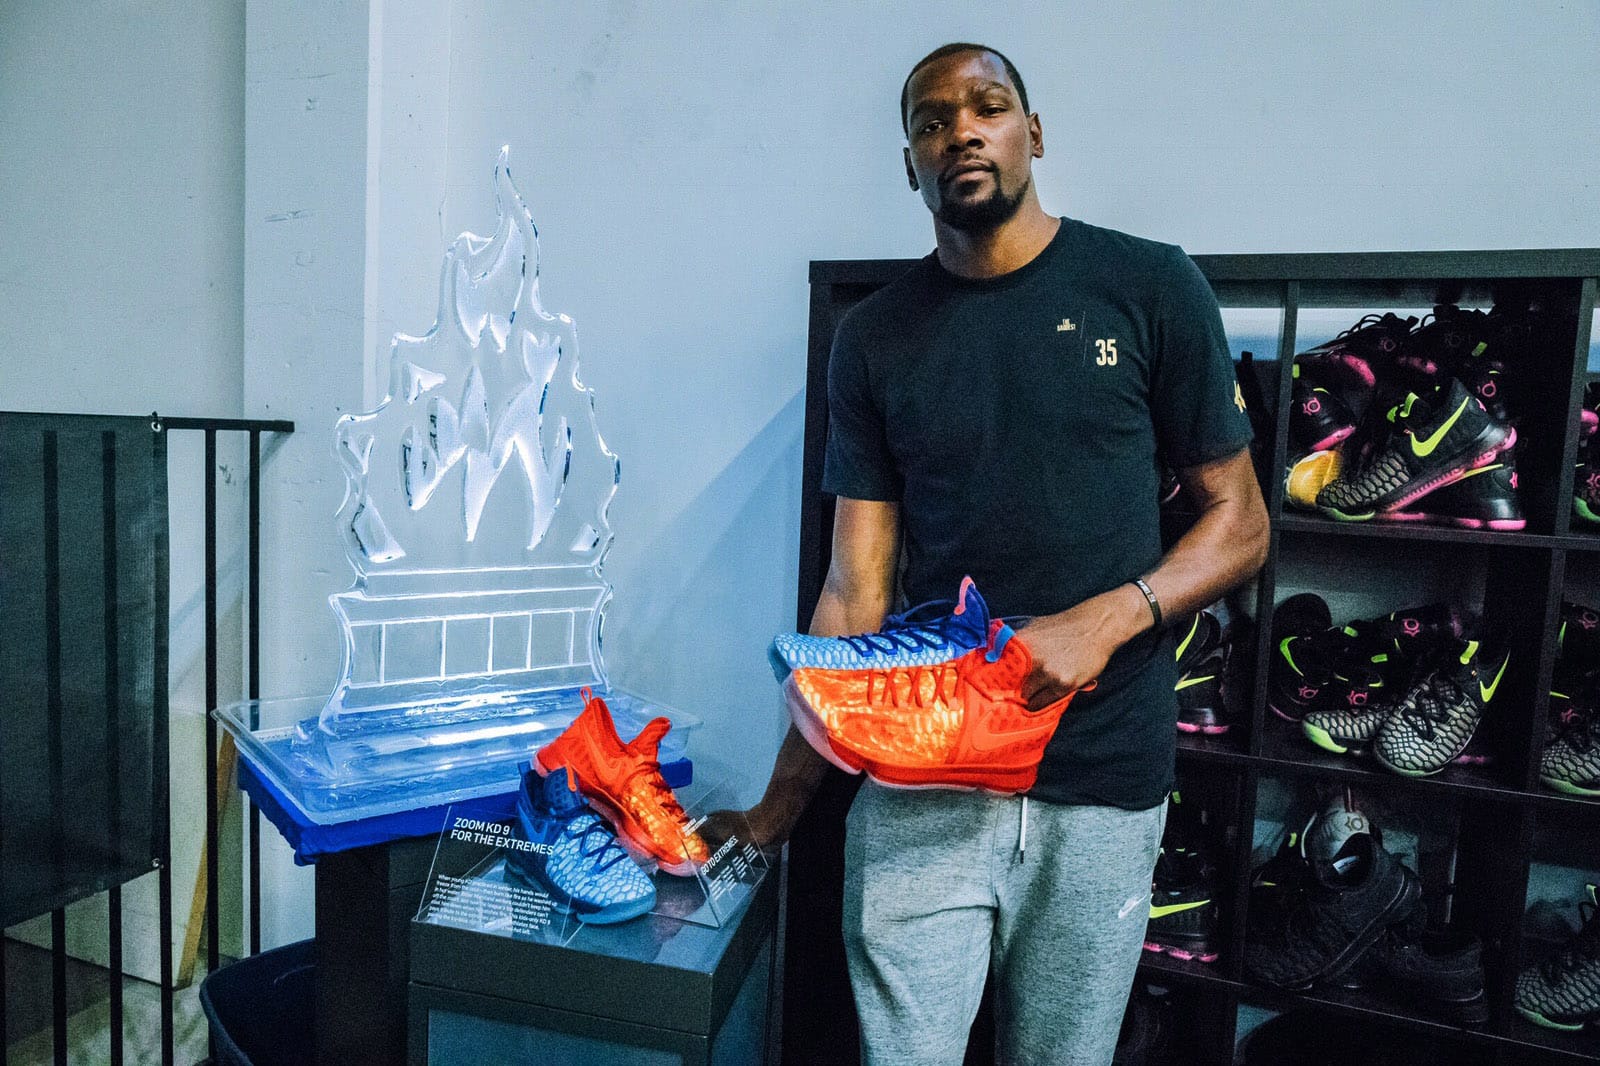 kd fire and ice